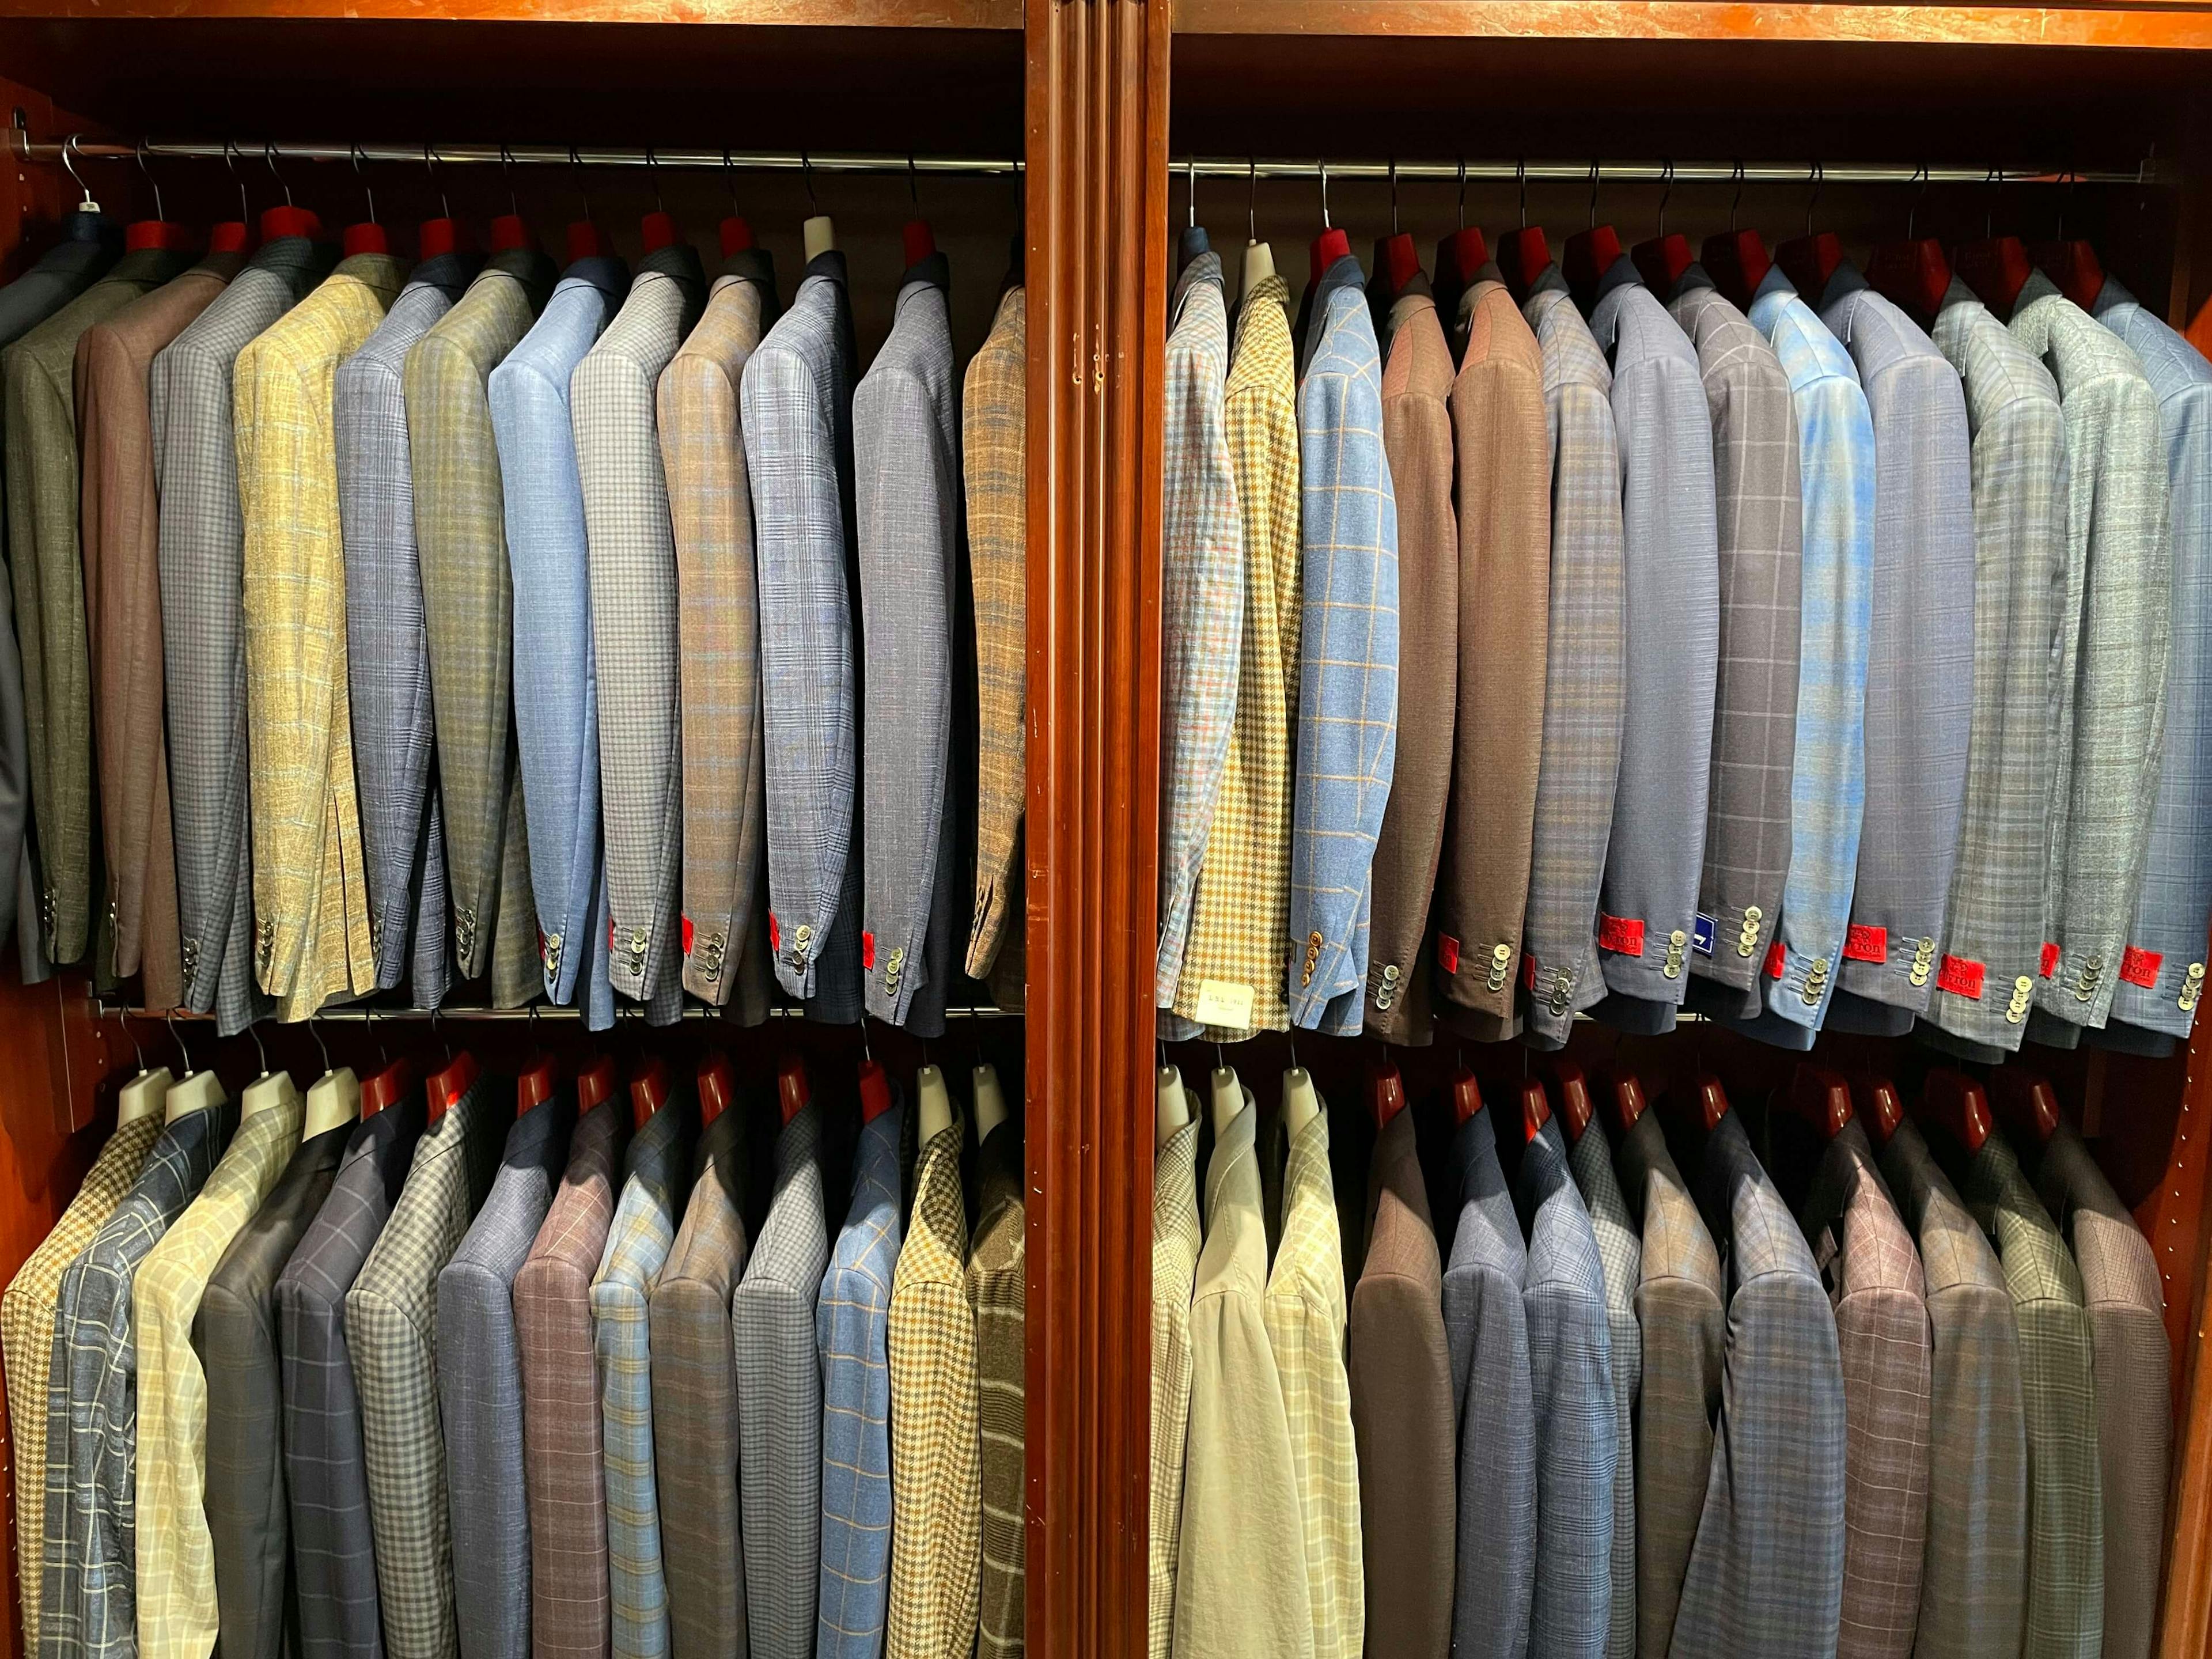 Suits and sports coats display on clothing rack in JwR's store.